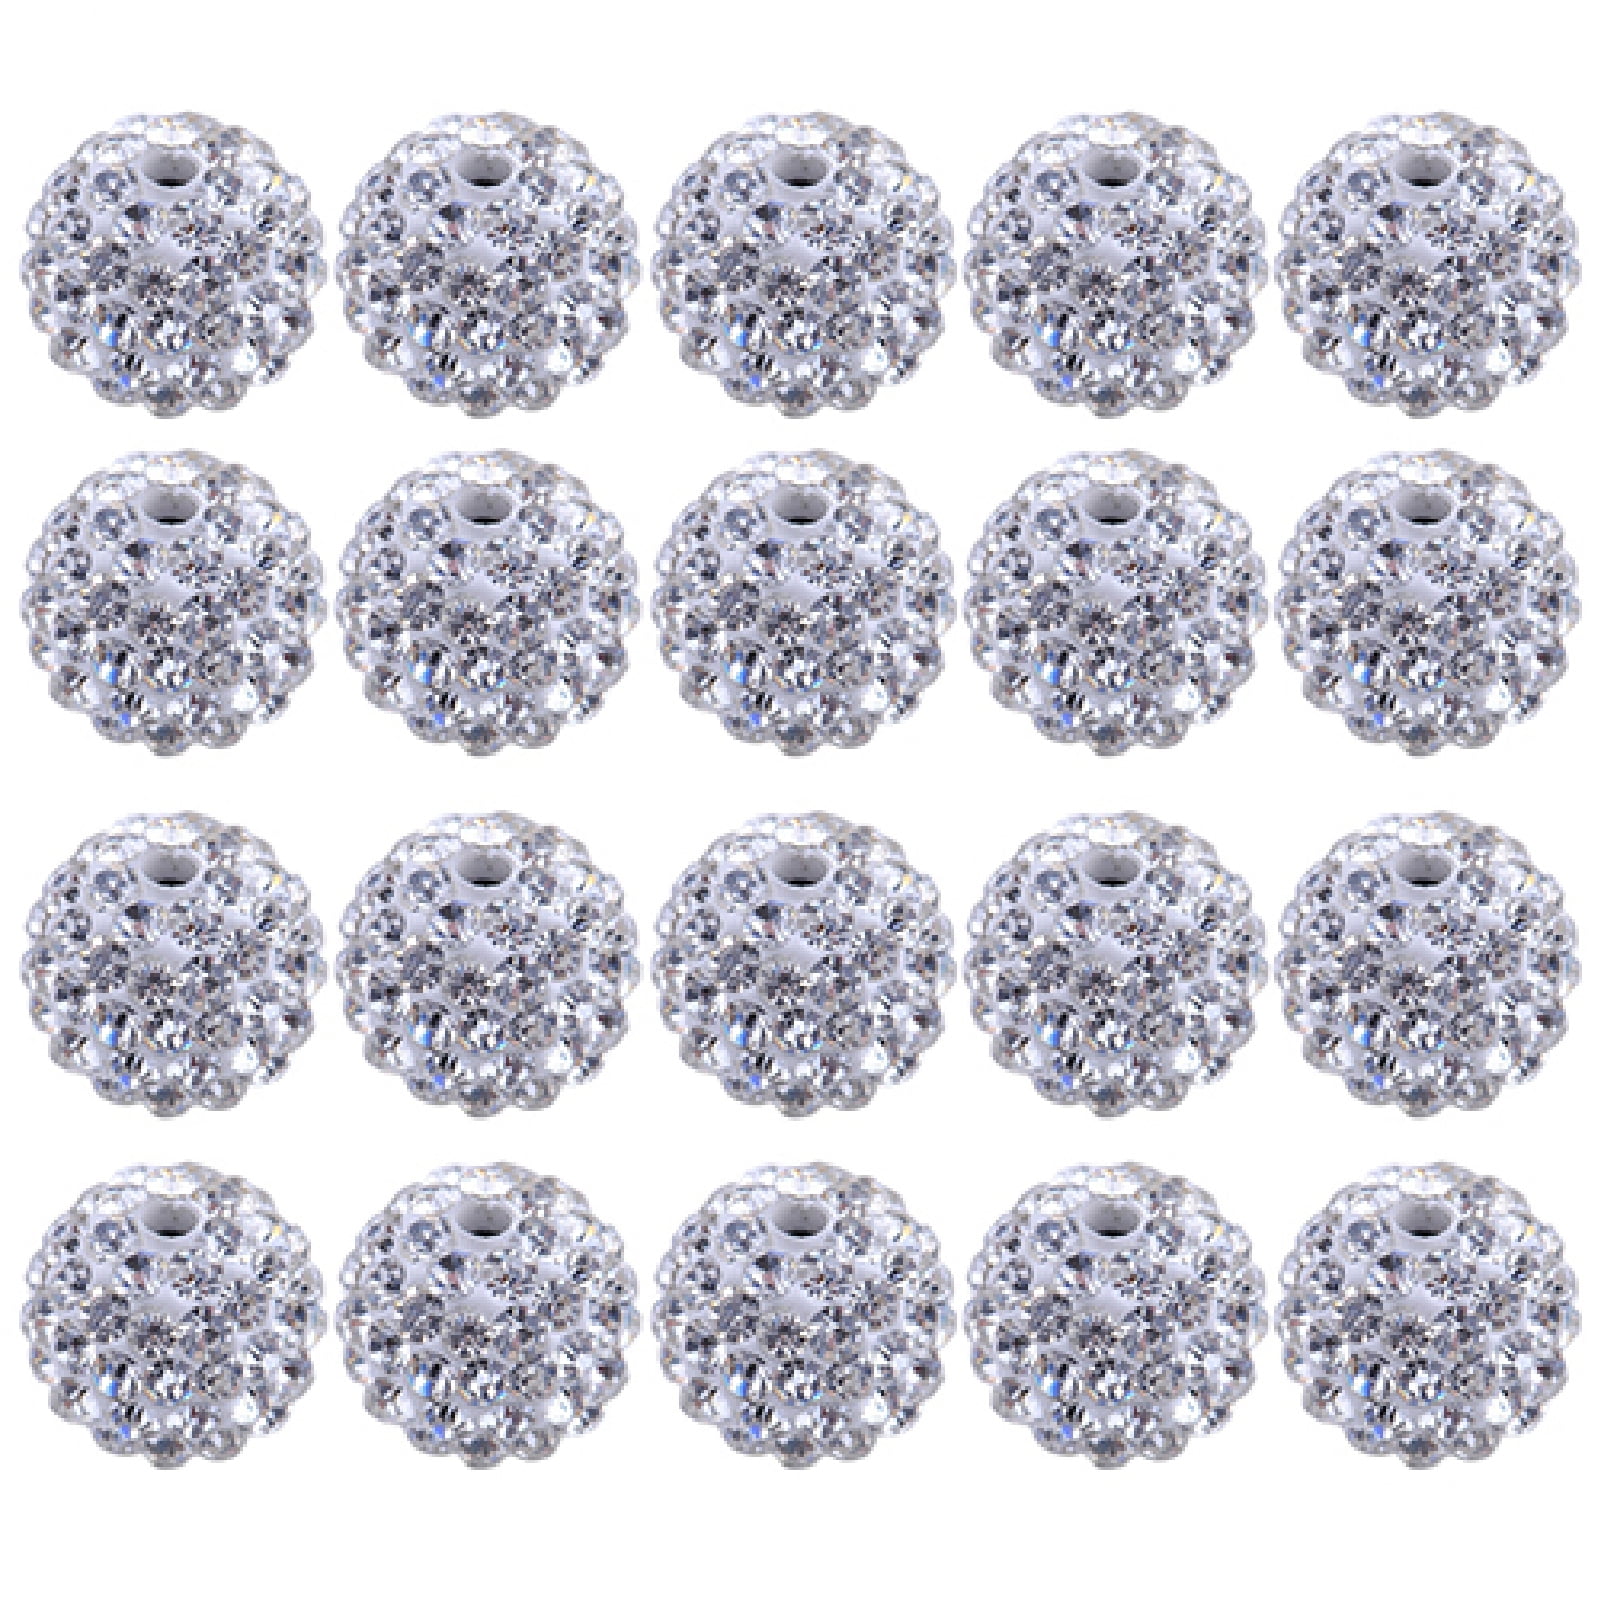 20PCS Czech Crystal Rhinestone Pave Clay Round Disco Ball Spacer Beads 8/10/12mm 